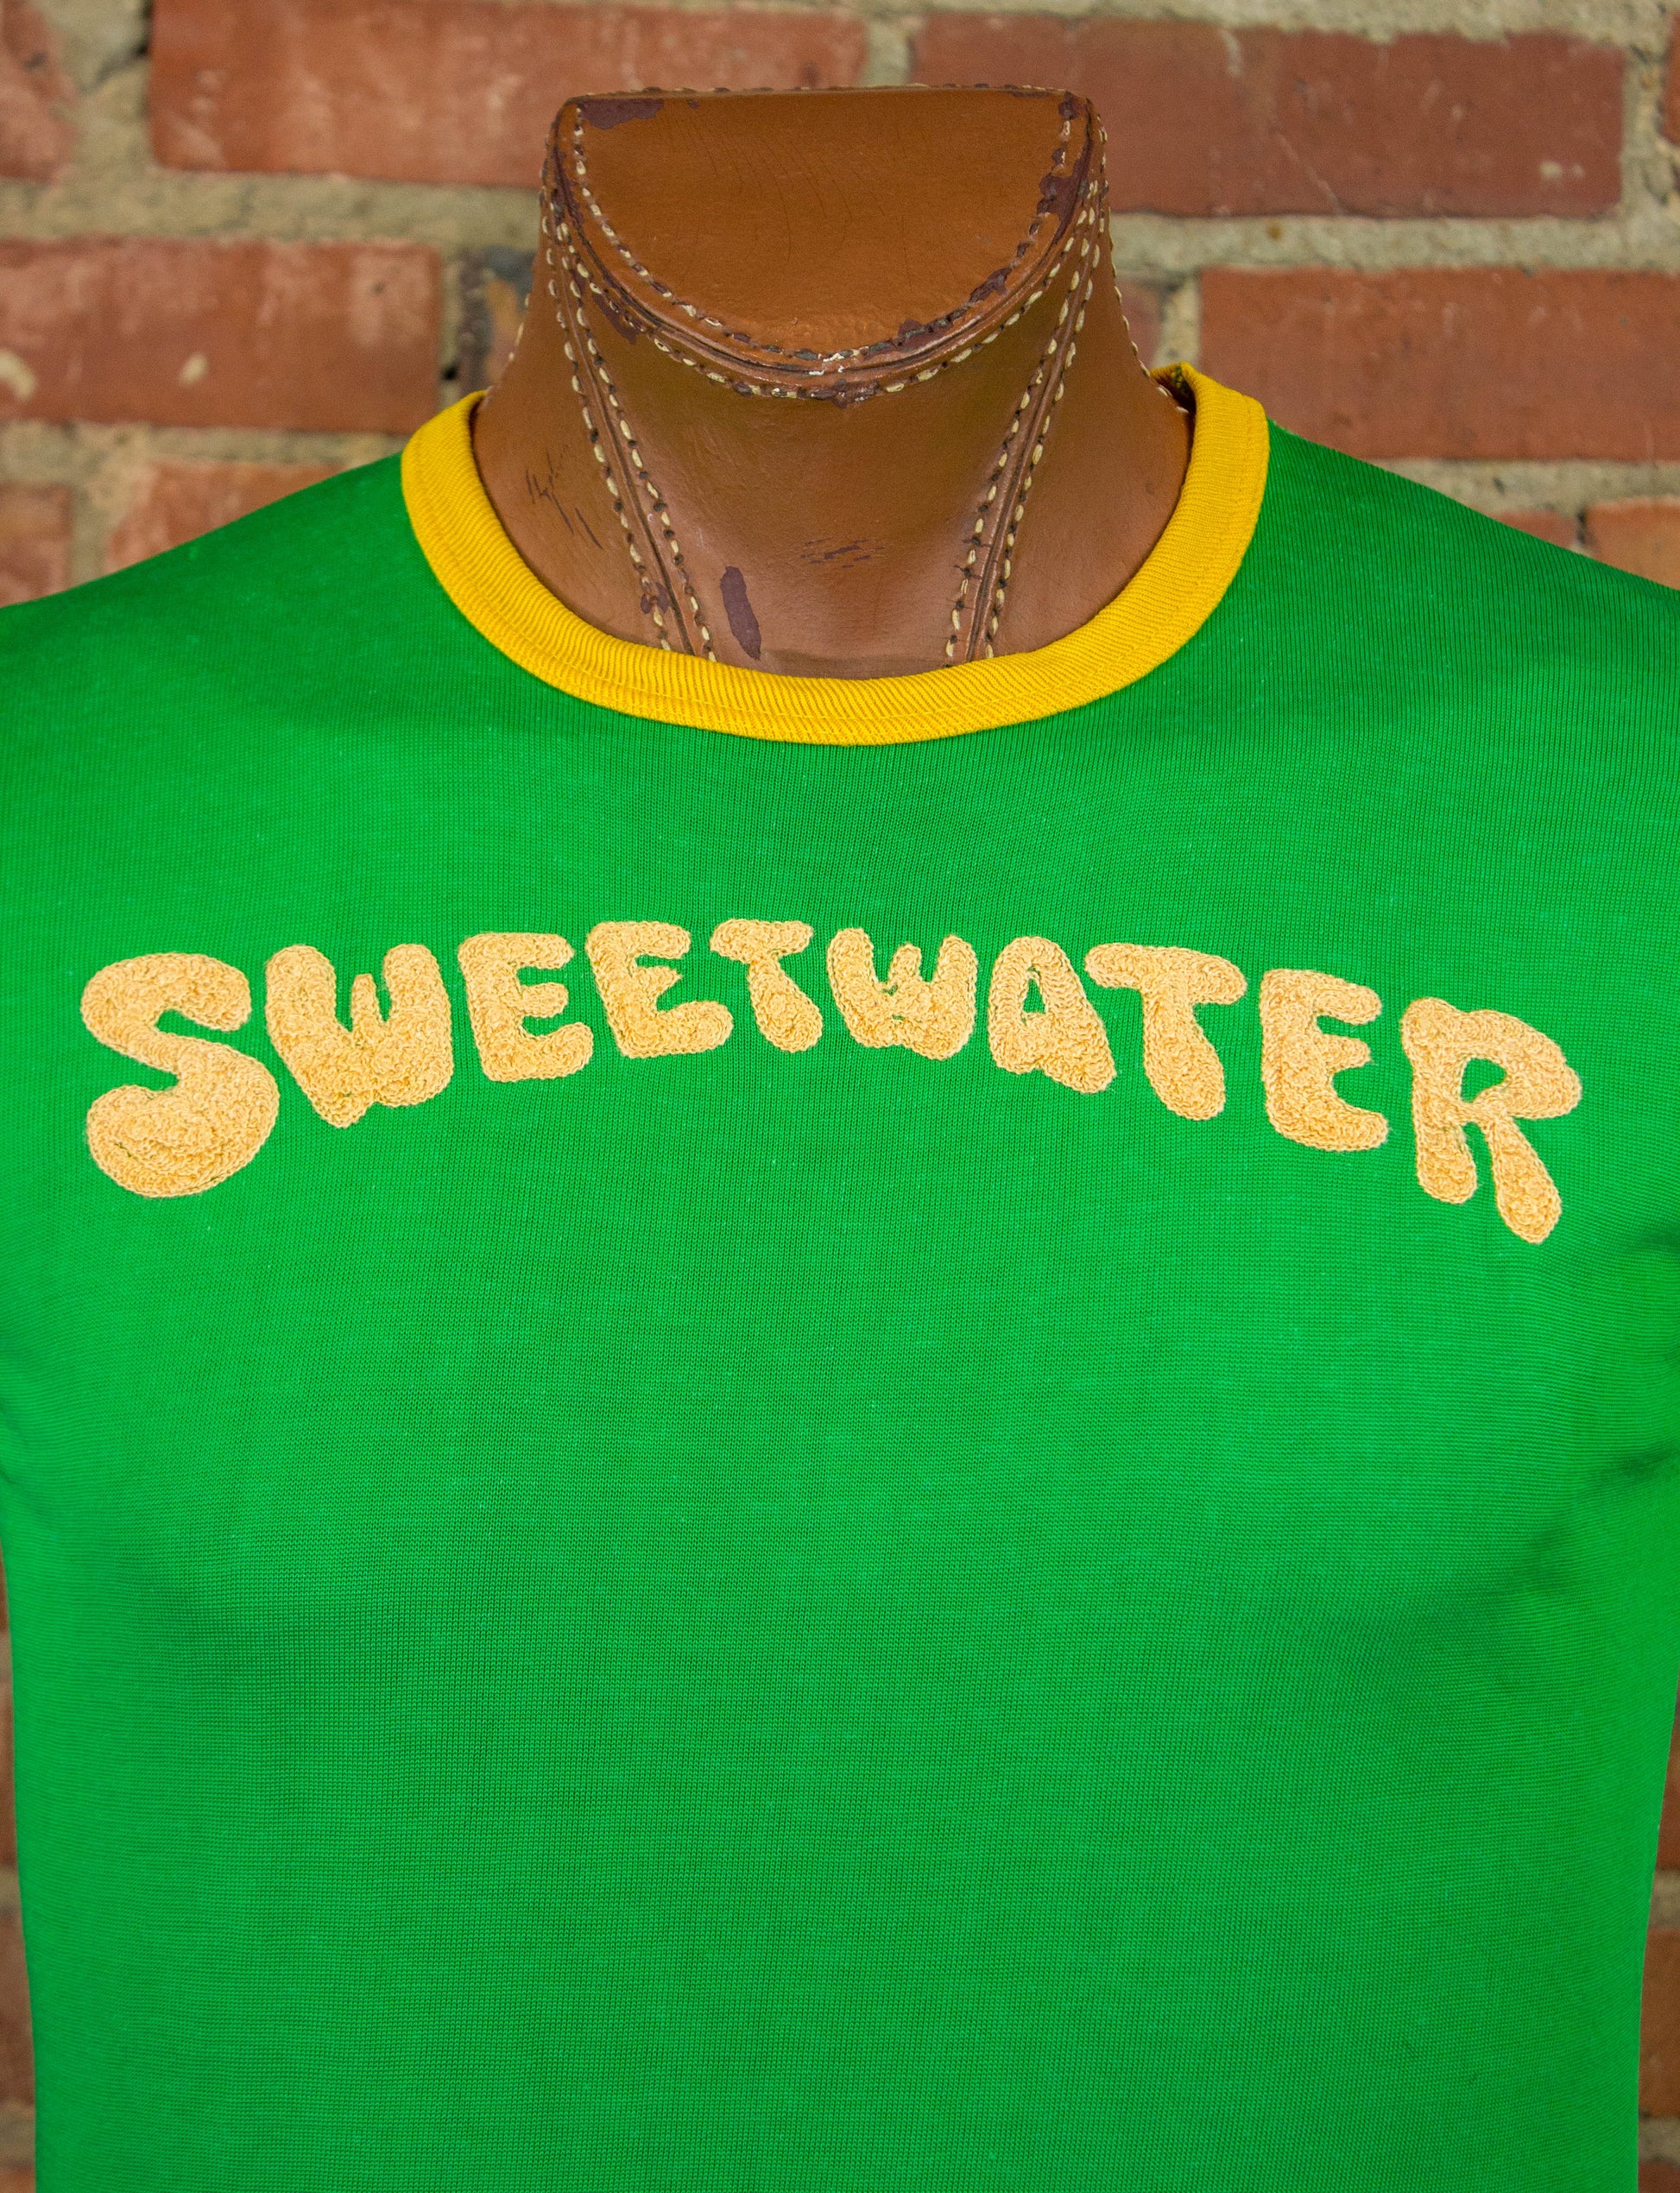 Vintage Sweetwater Nylon Chain Stitch Jersey 60s Green and Yellow Medium